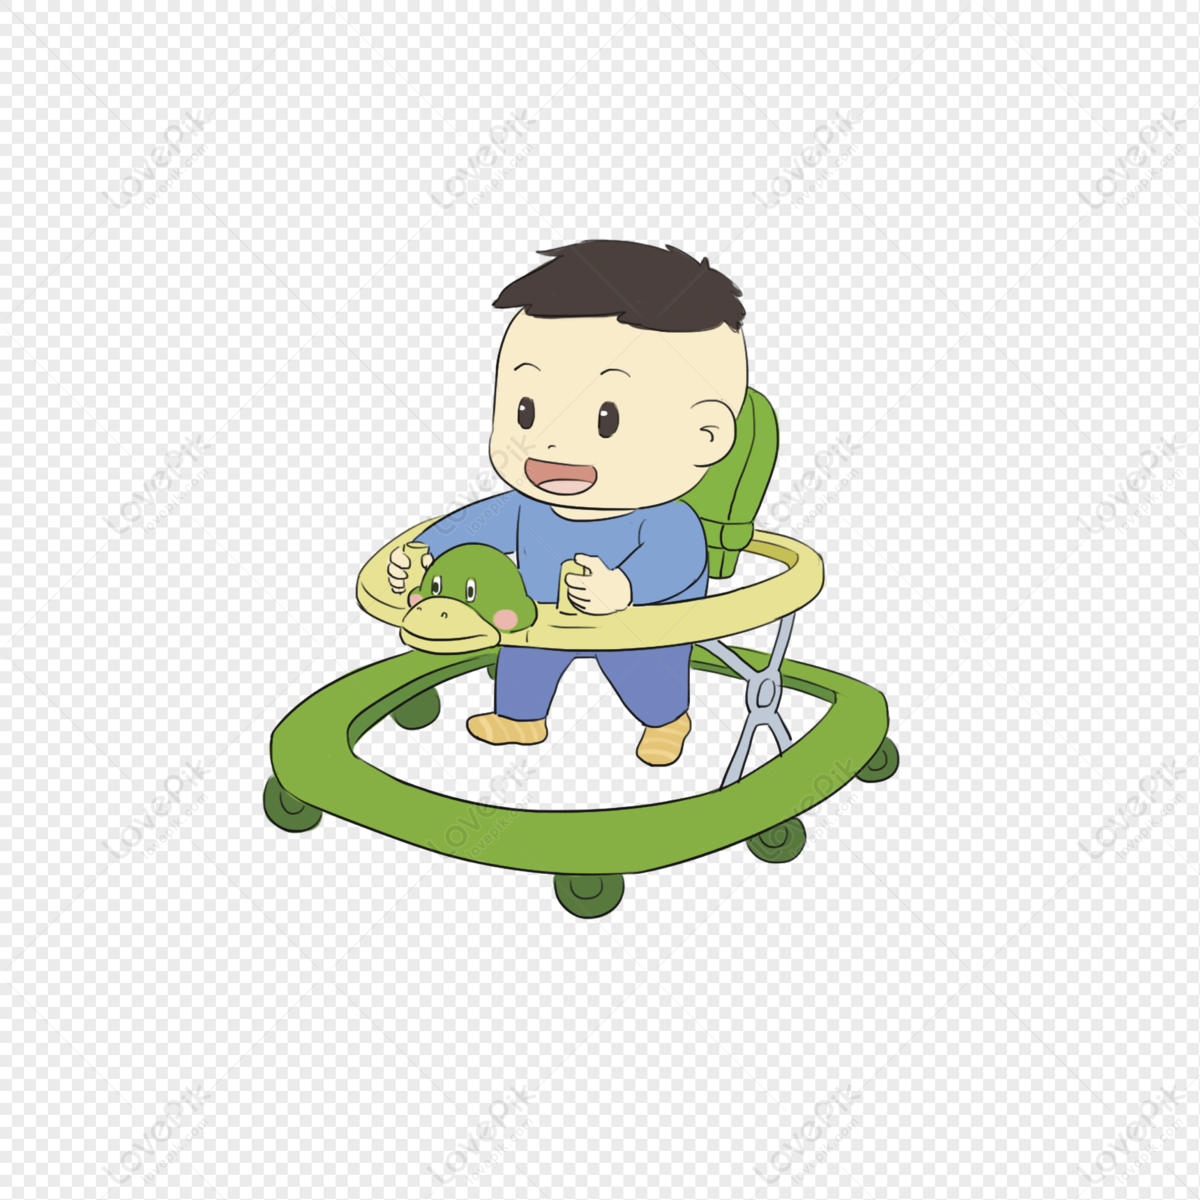 Baby Learning To Walk PNG Transparent Image And Clipart Image For Free  Download - Lovepik | 401253957